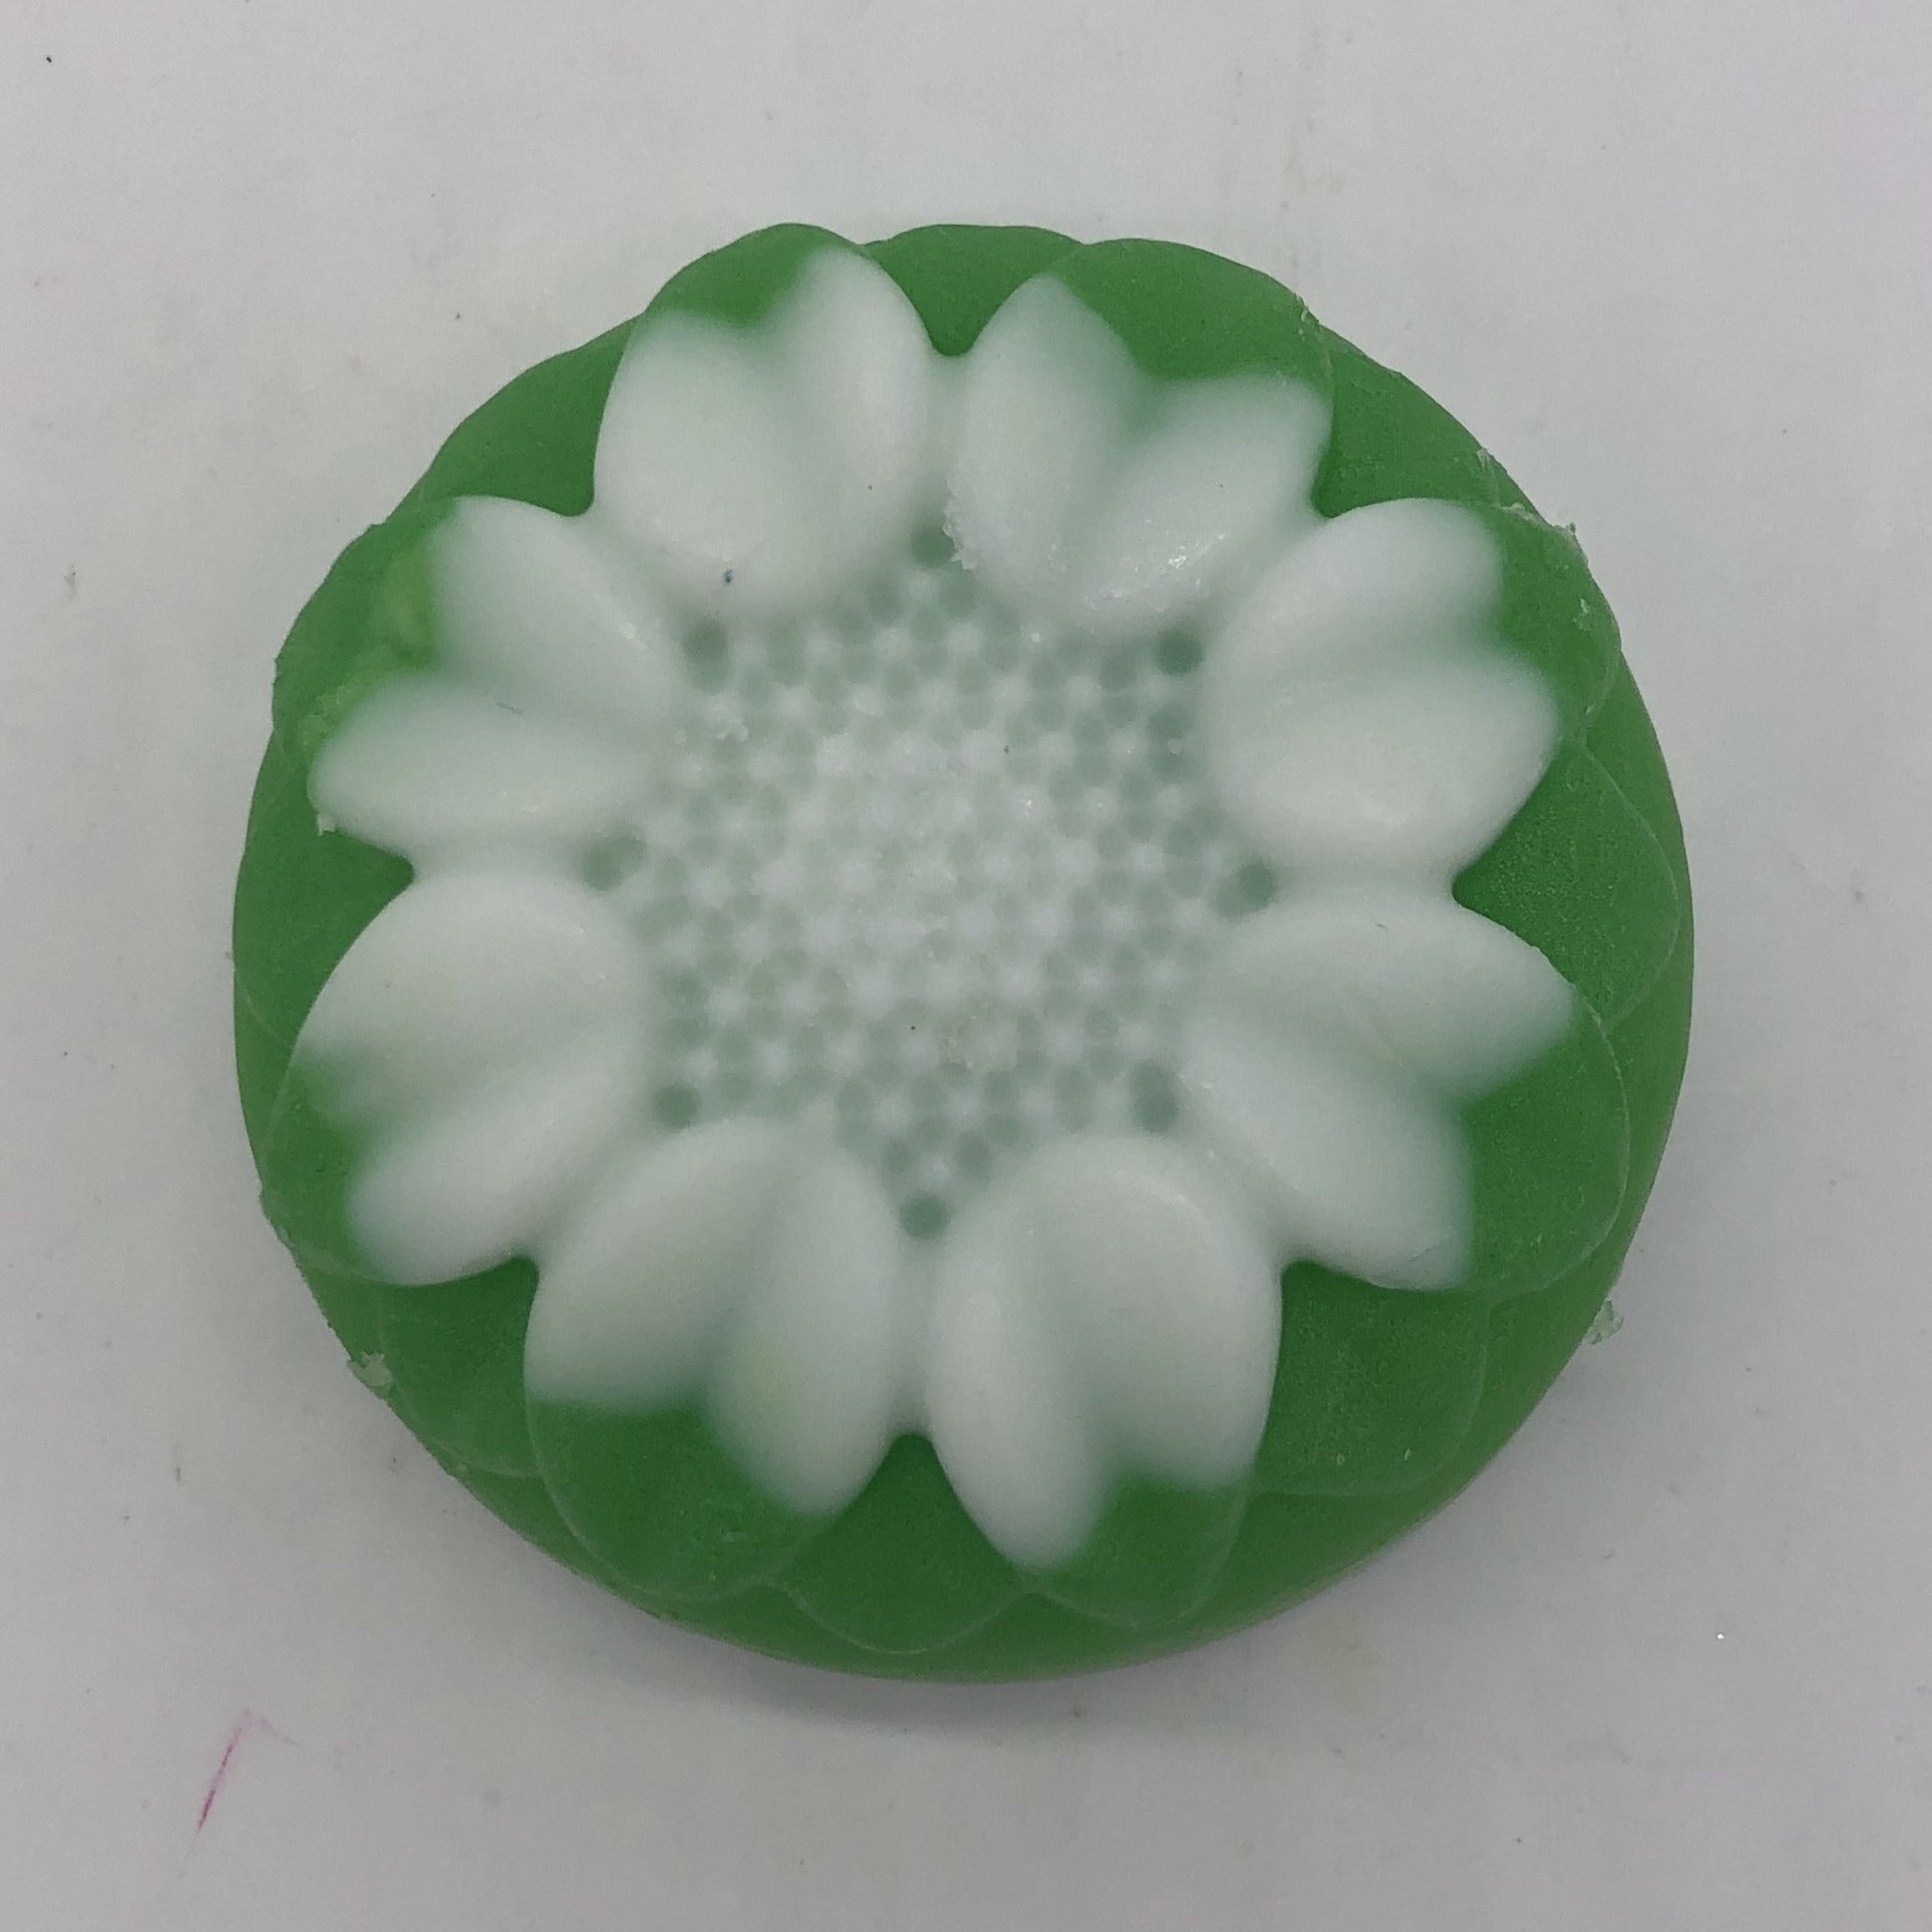 Green floral soap with white flower design